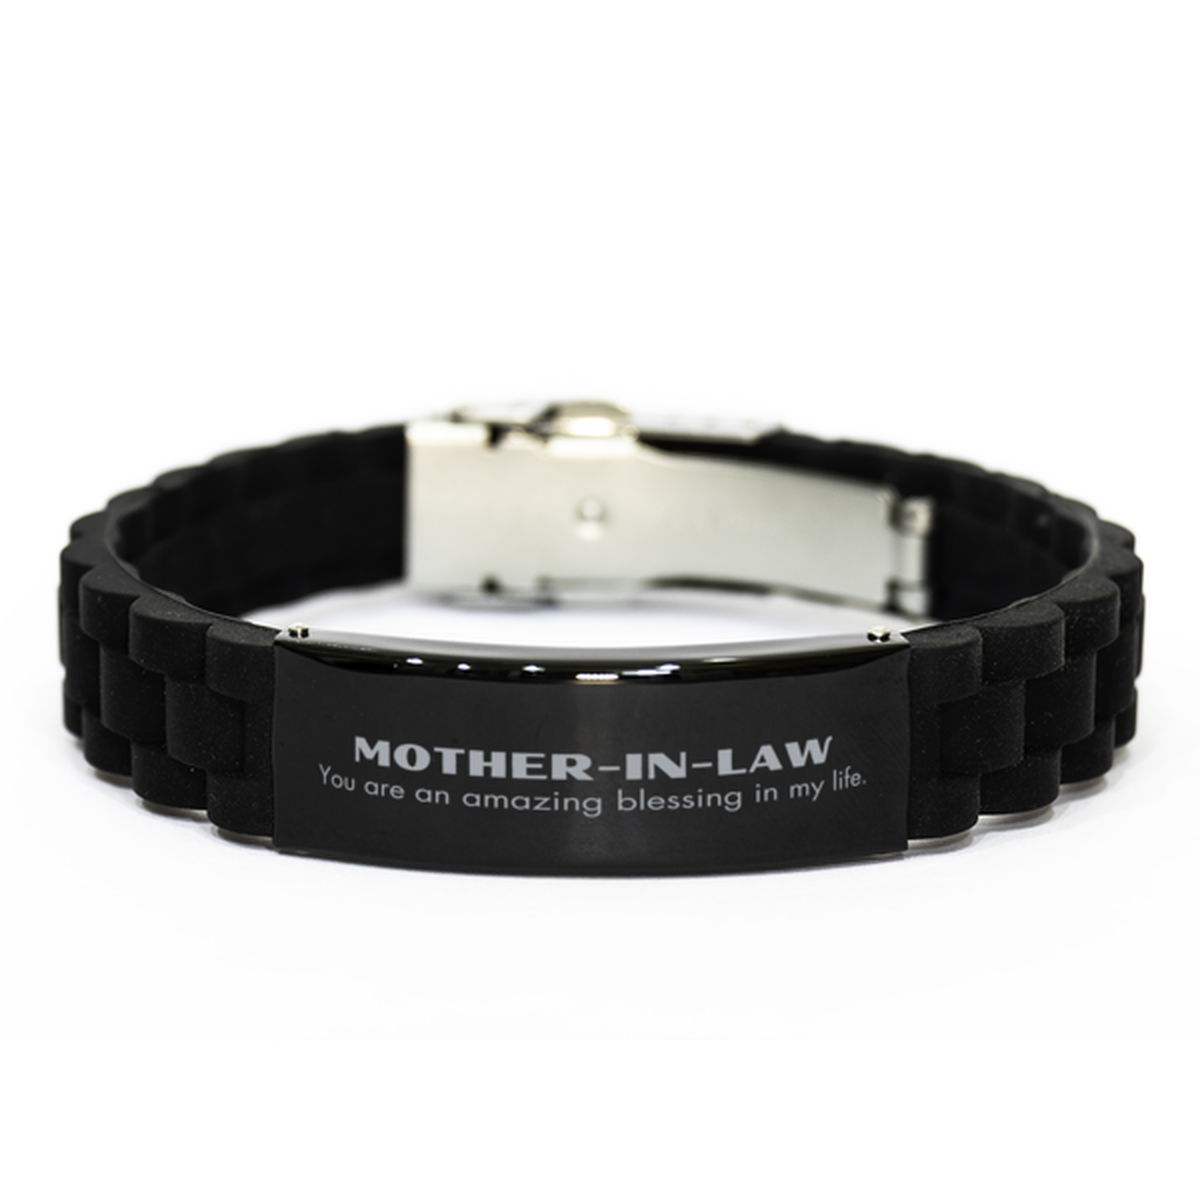 Mother-In-Law Black Glidelock Clasp Bracelet, You are an amazing blessing in my life, Thank You Gifts For Mother-In-Law, Inspirational Birthday Christmas Unique Gifts For Mother-In-Law